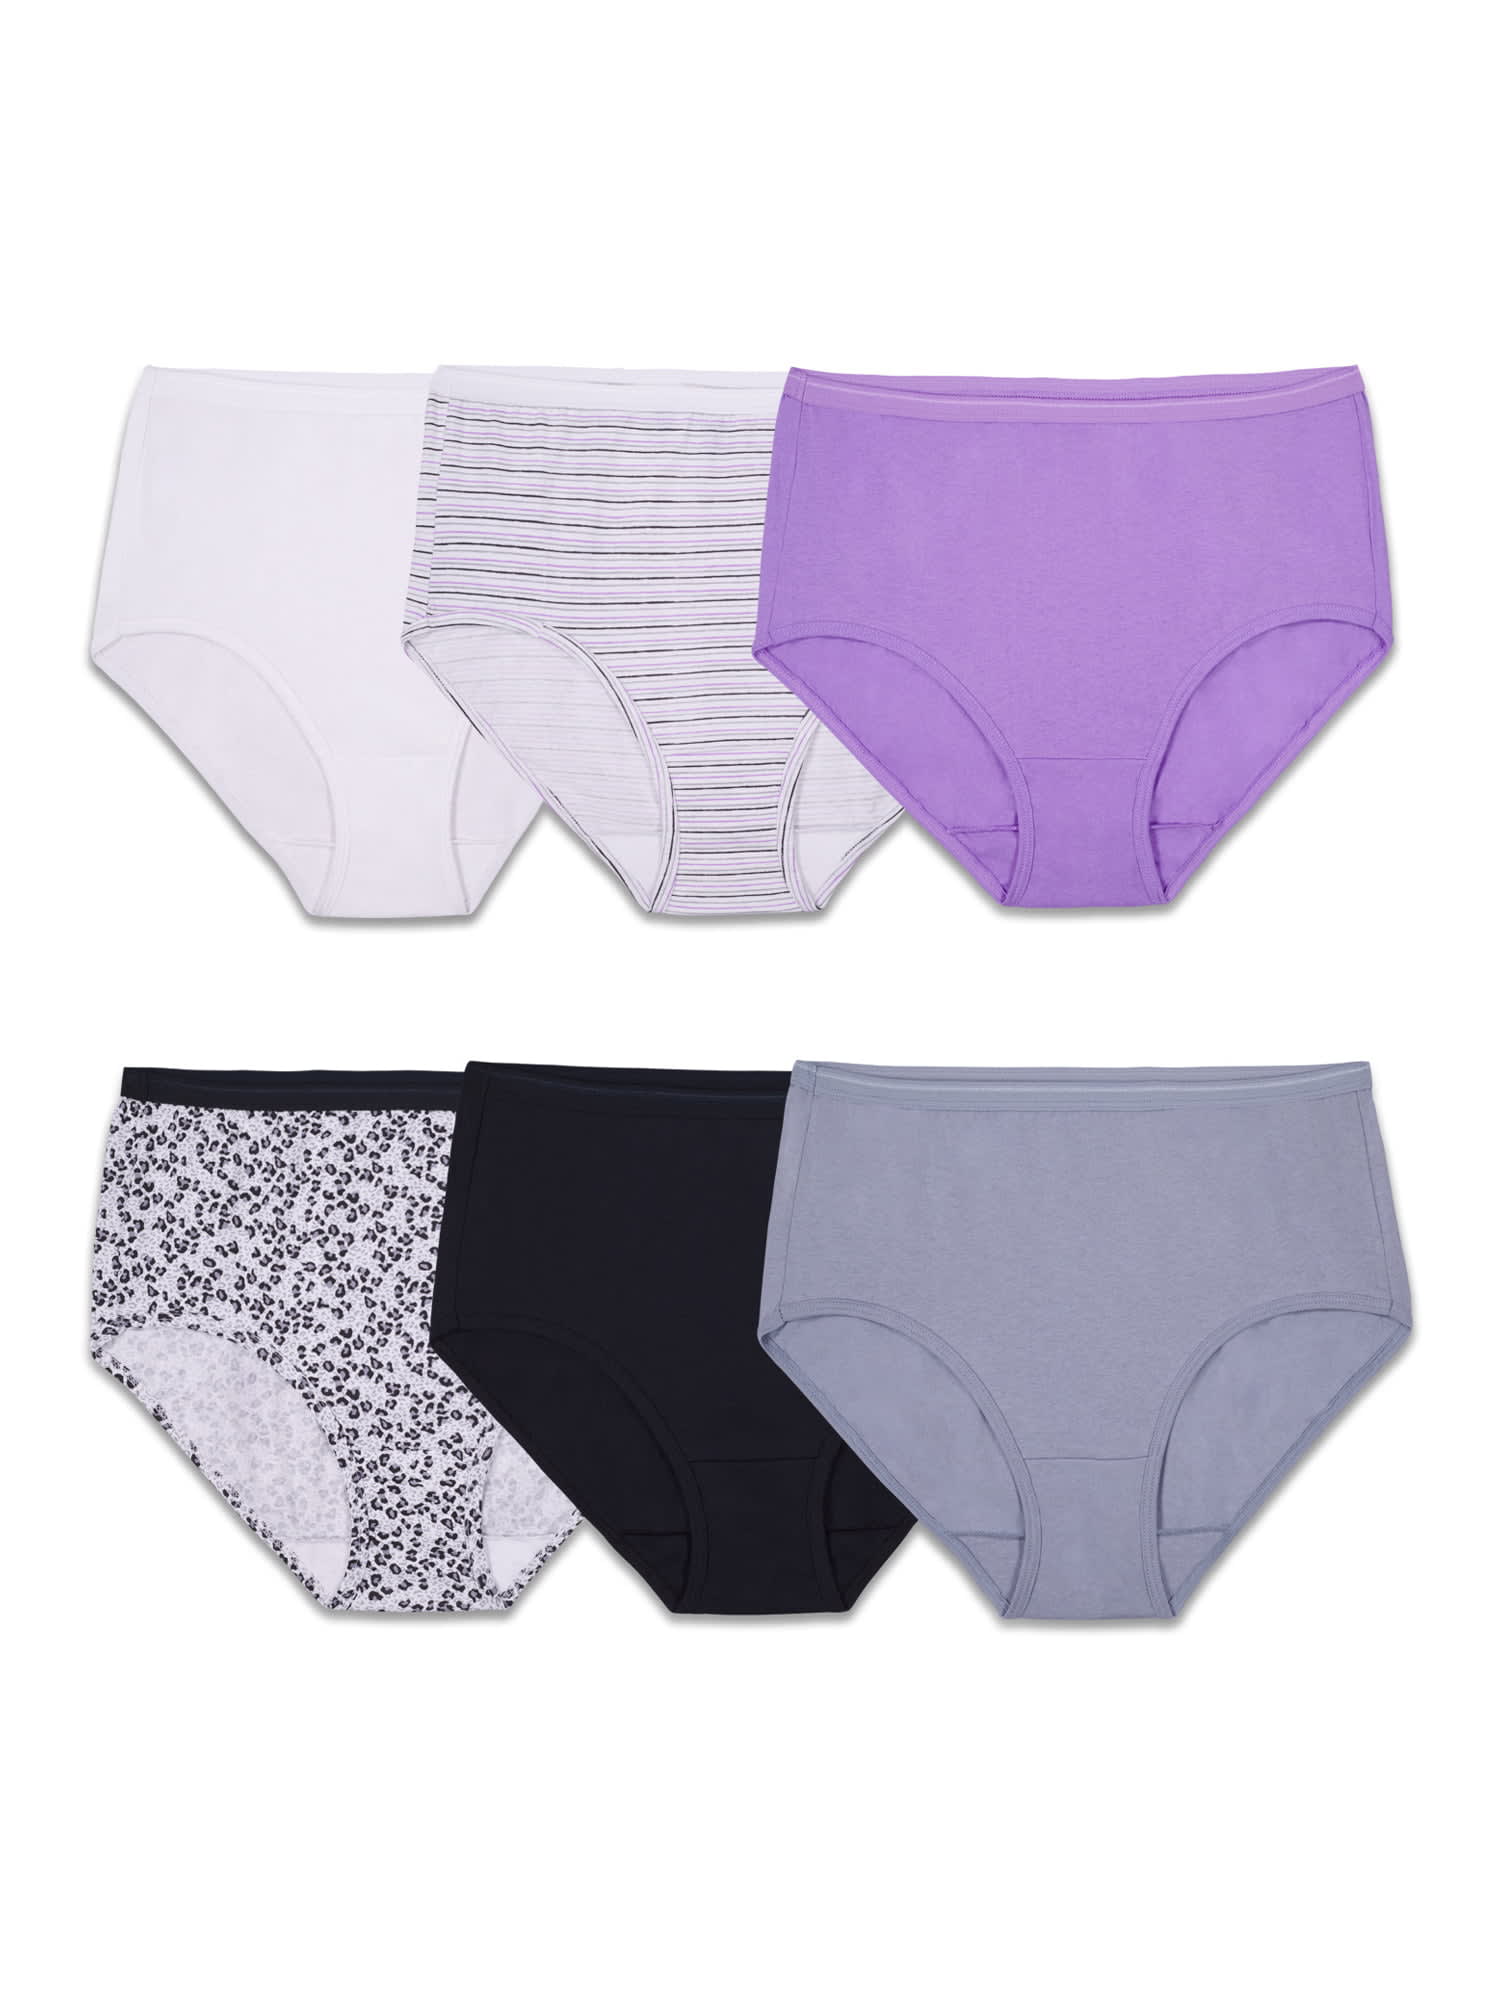 Fruit of the Loom Women's Hi-Cut Underwear, 10 Pack, Sizes S-2XL - DroneUp  Delivery